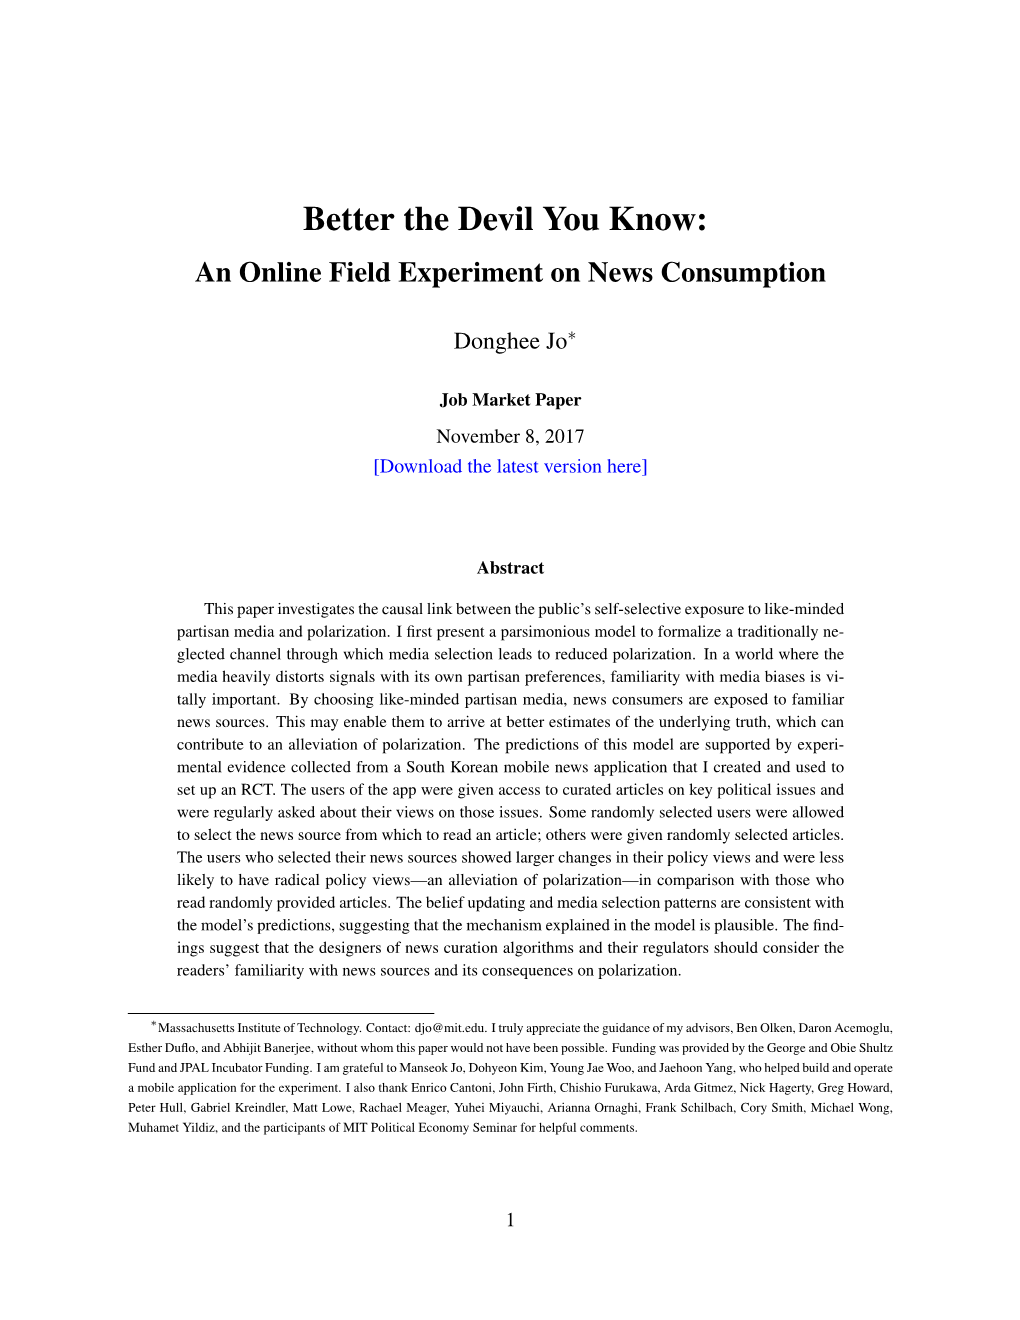 Better the Devil You Know: an Online Field Experiment on News Consumption